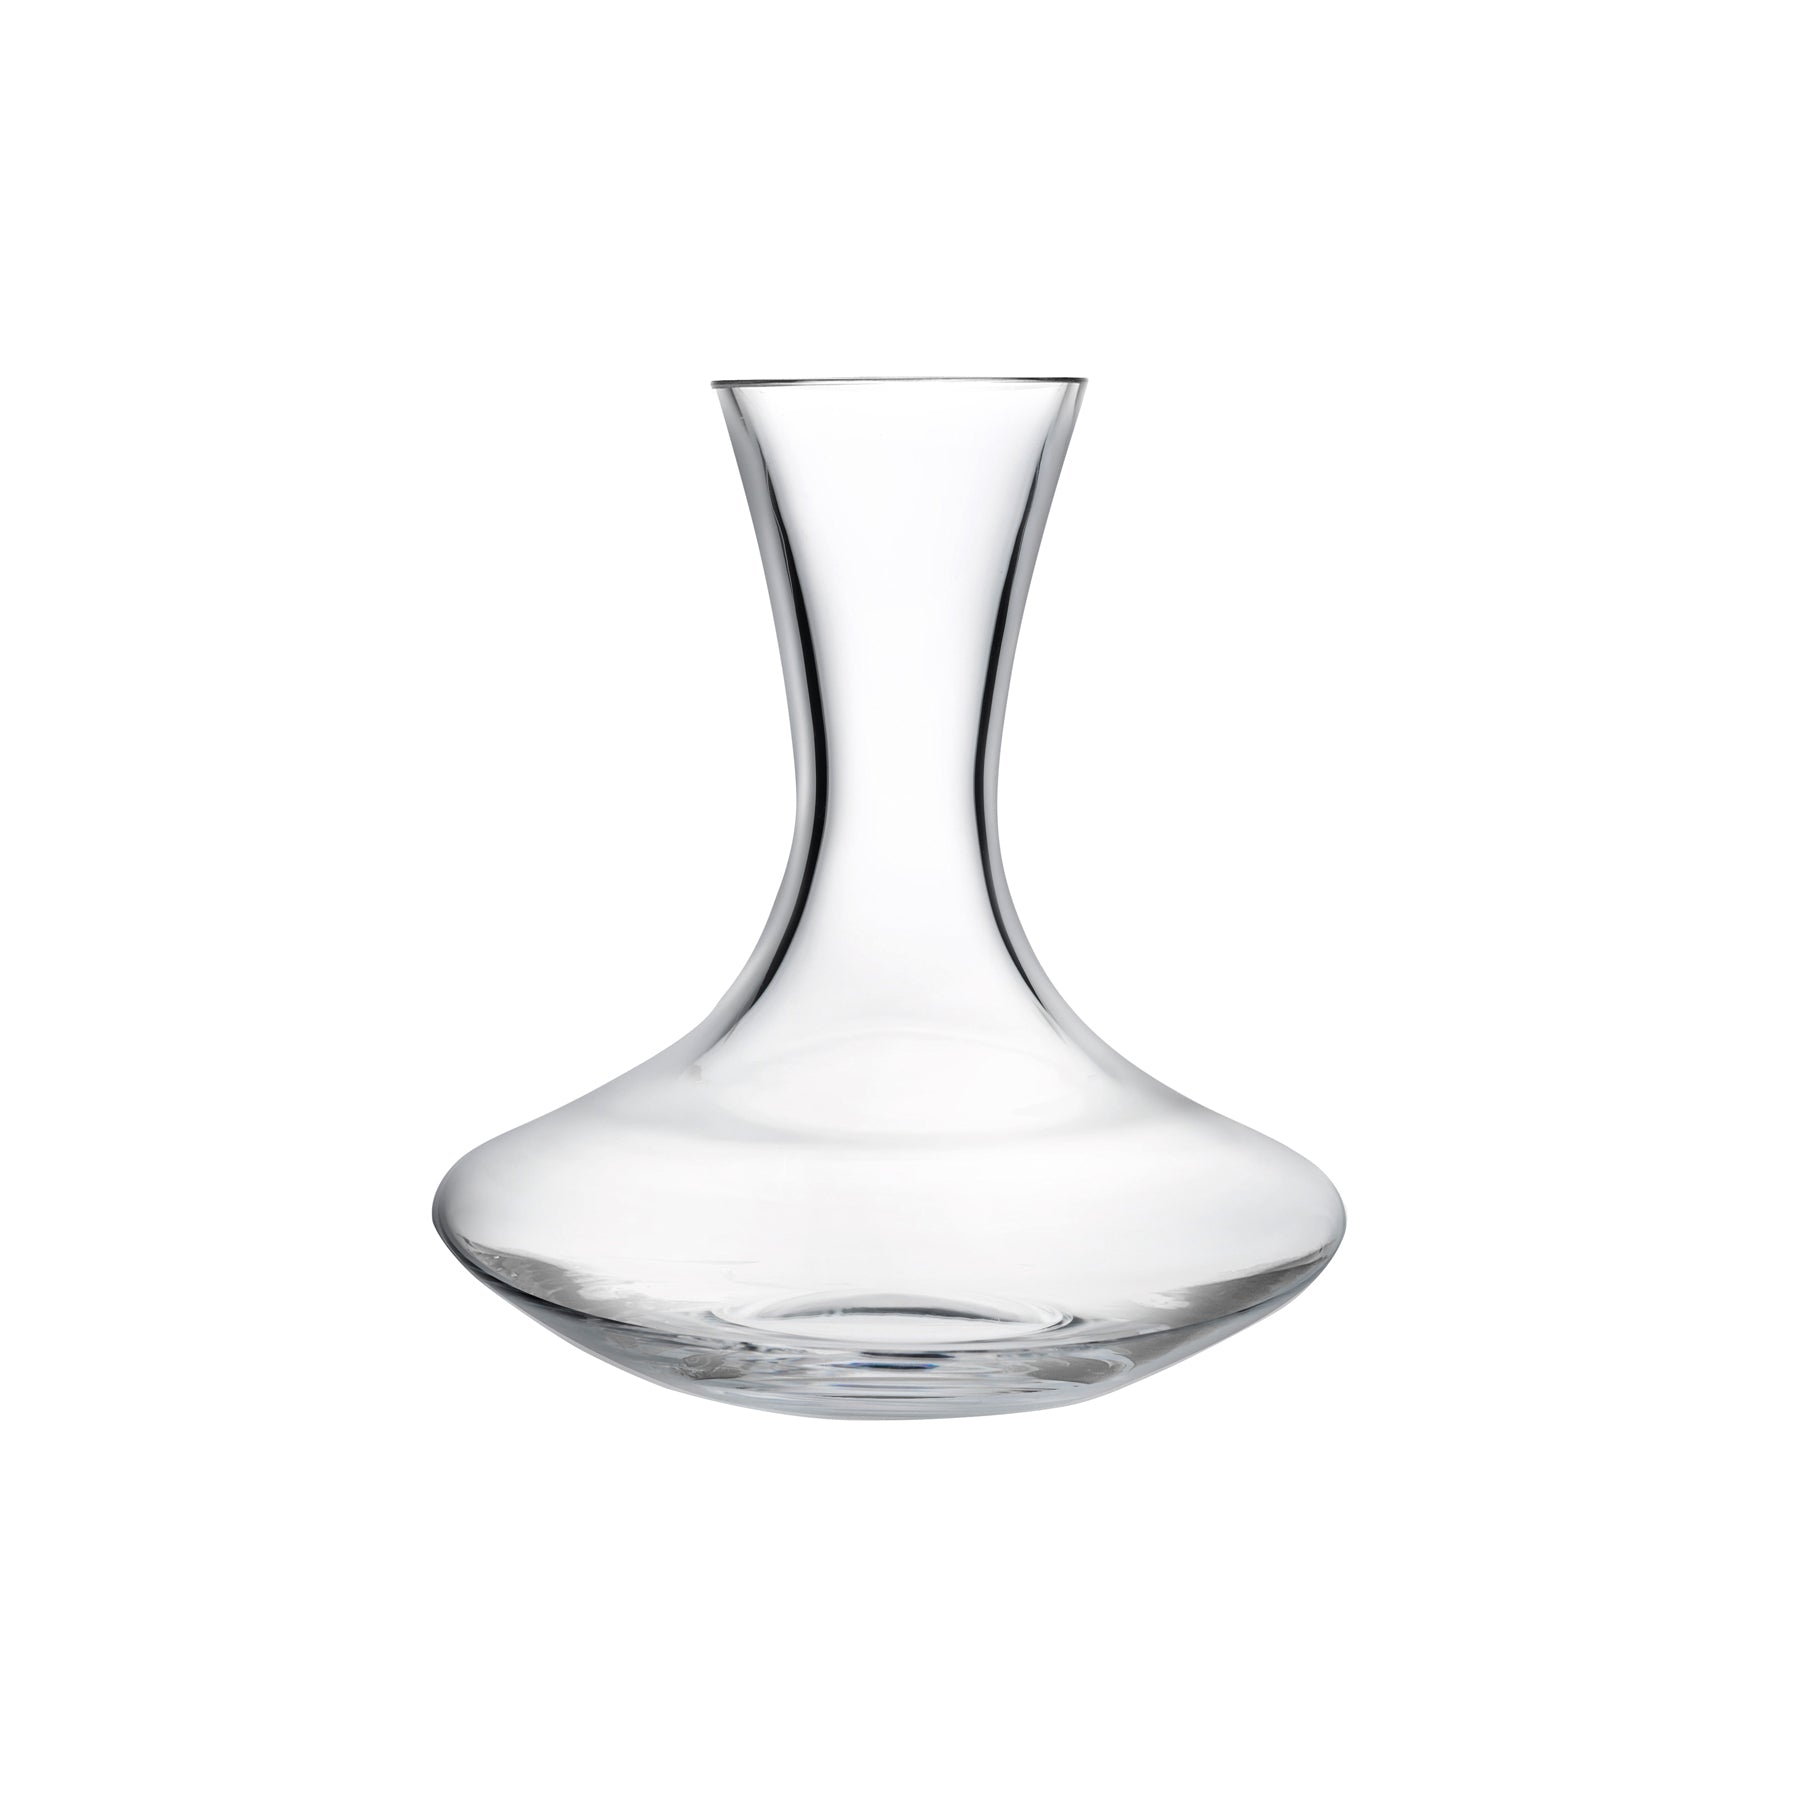 ego personal decanter by nude at adorn.house 